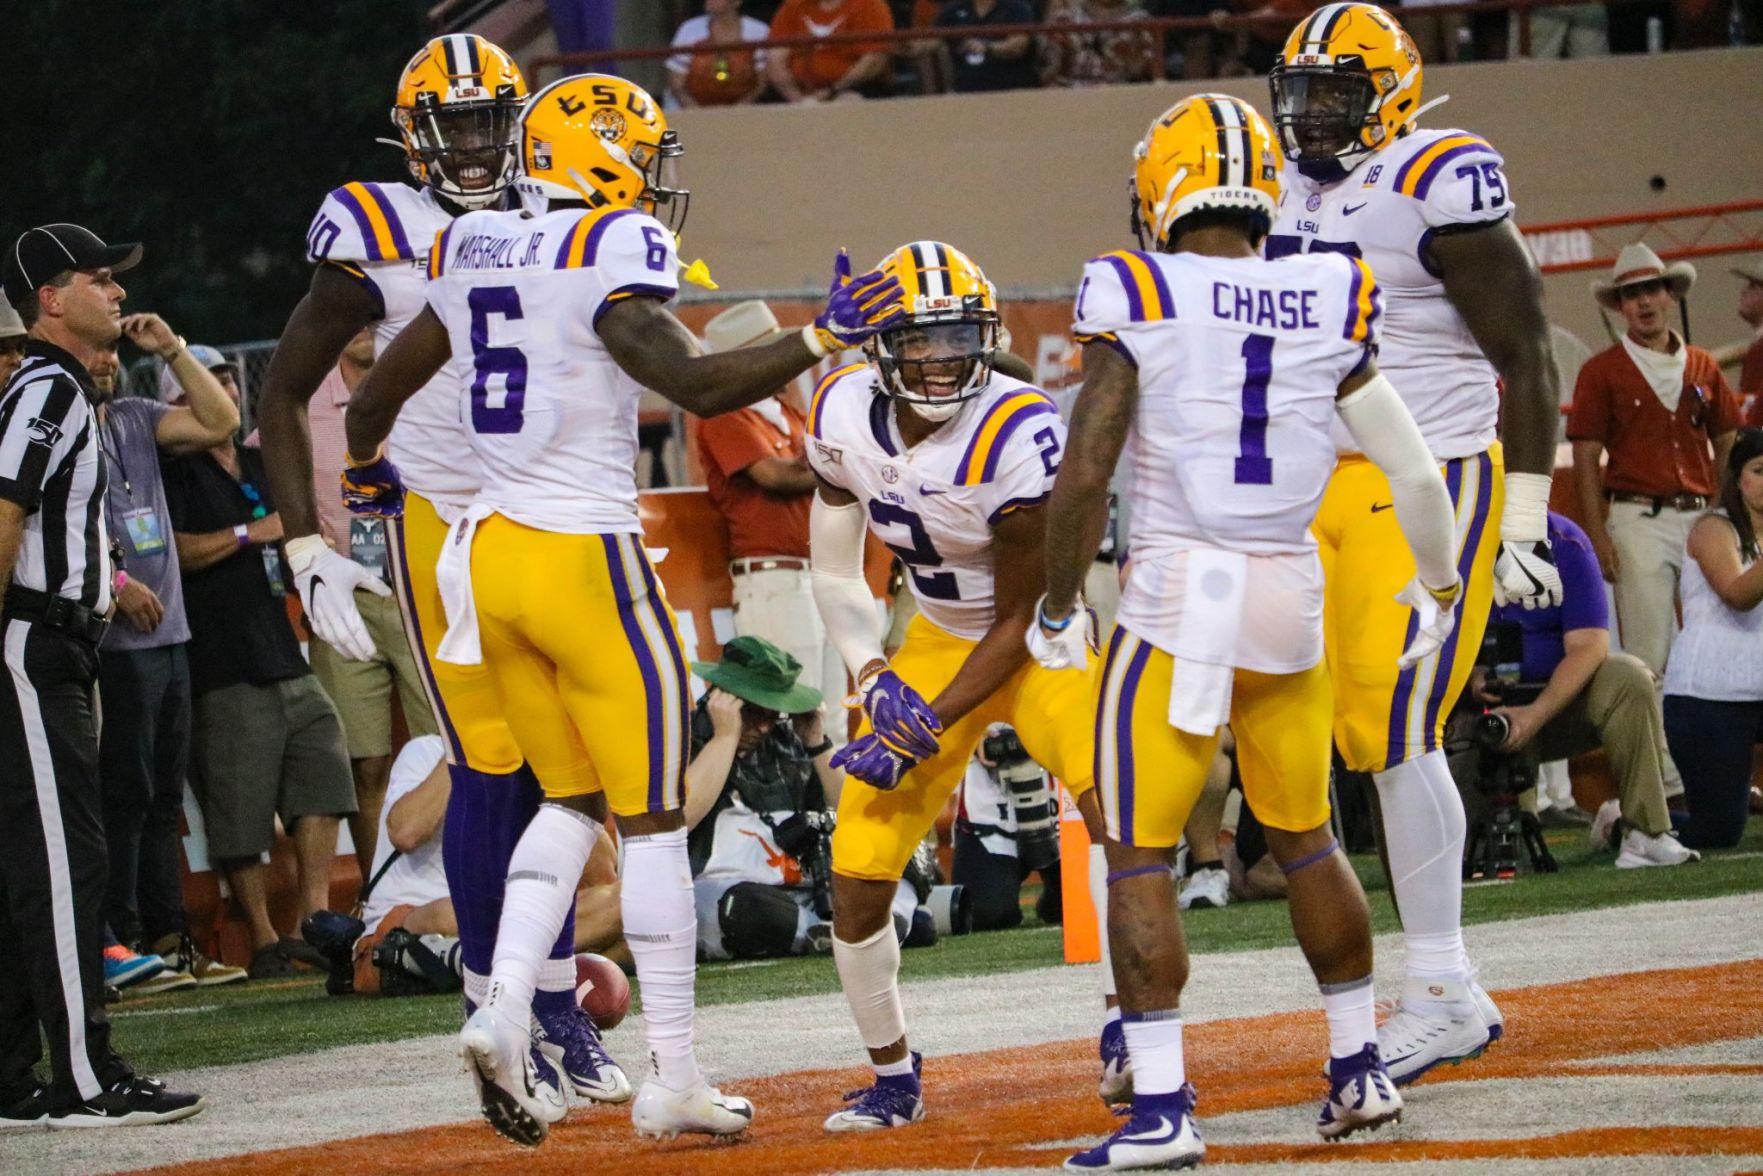 LSU receivers Marshall, Chase, Jefferson reap benefits of new offensive